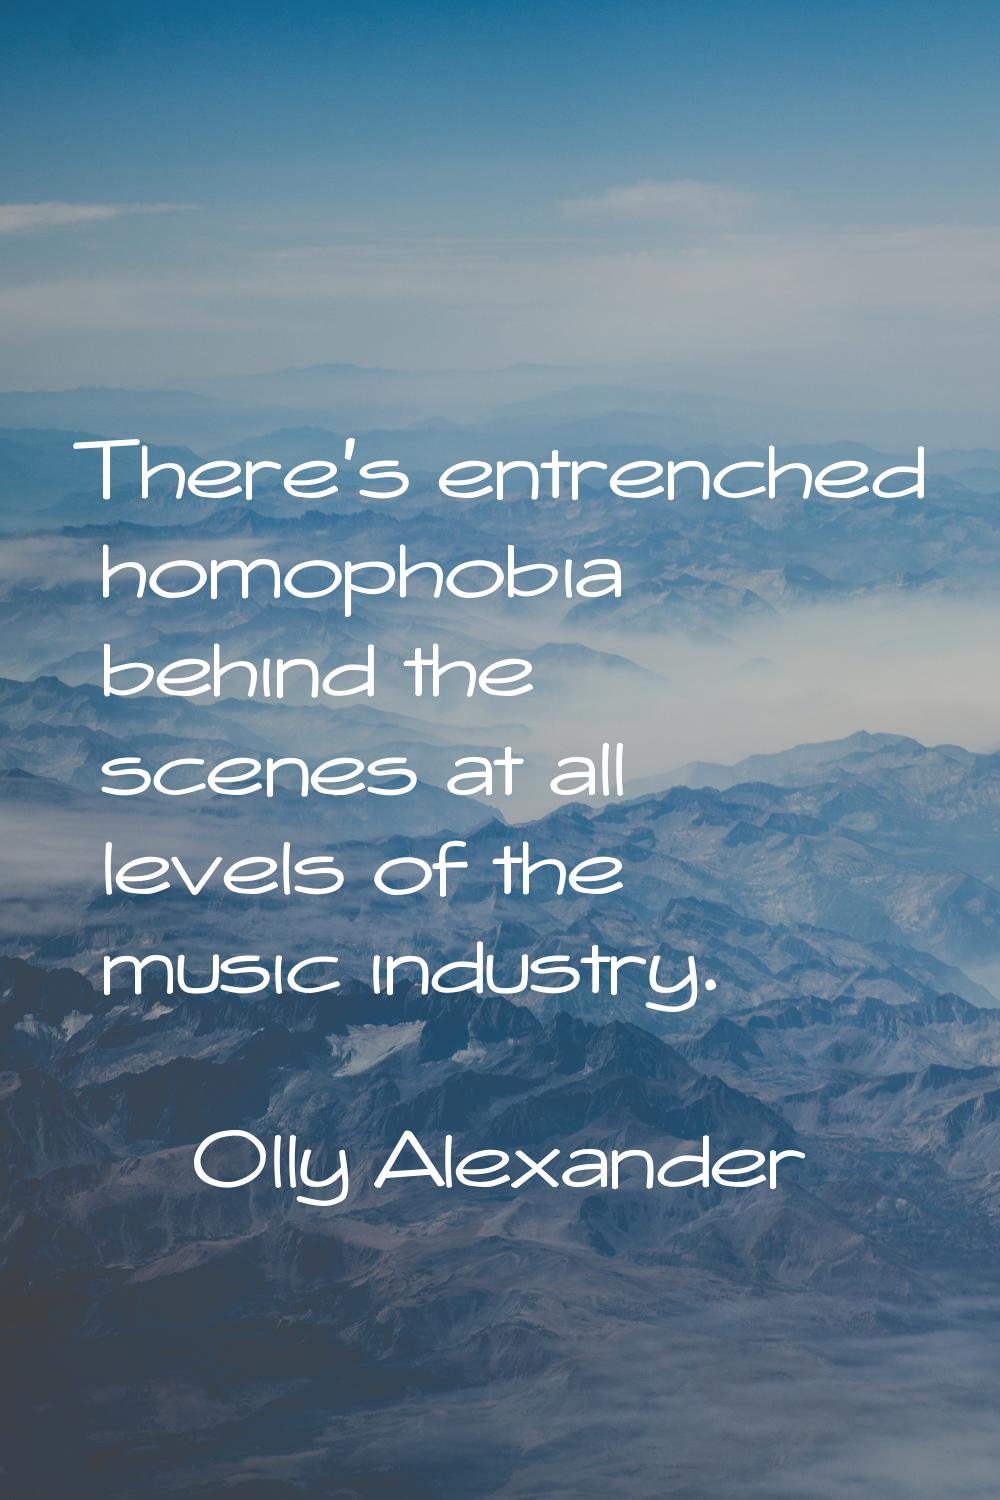 There's entrenched homophobia behind the scenes at all levels of the music industry.